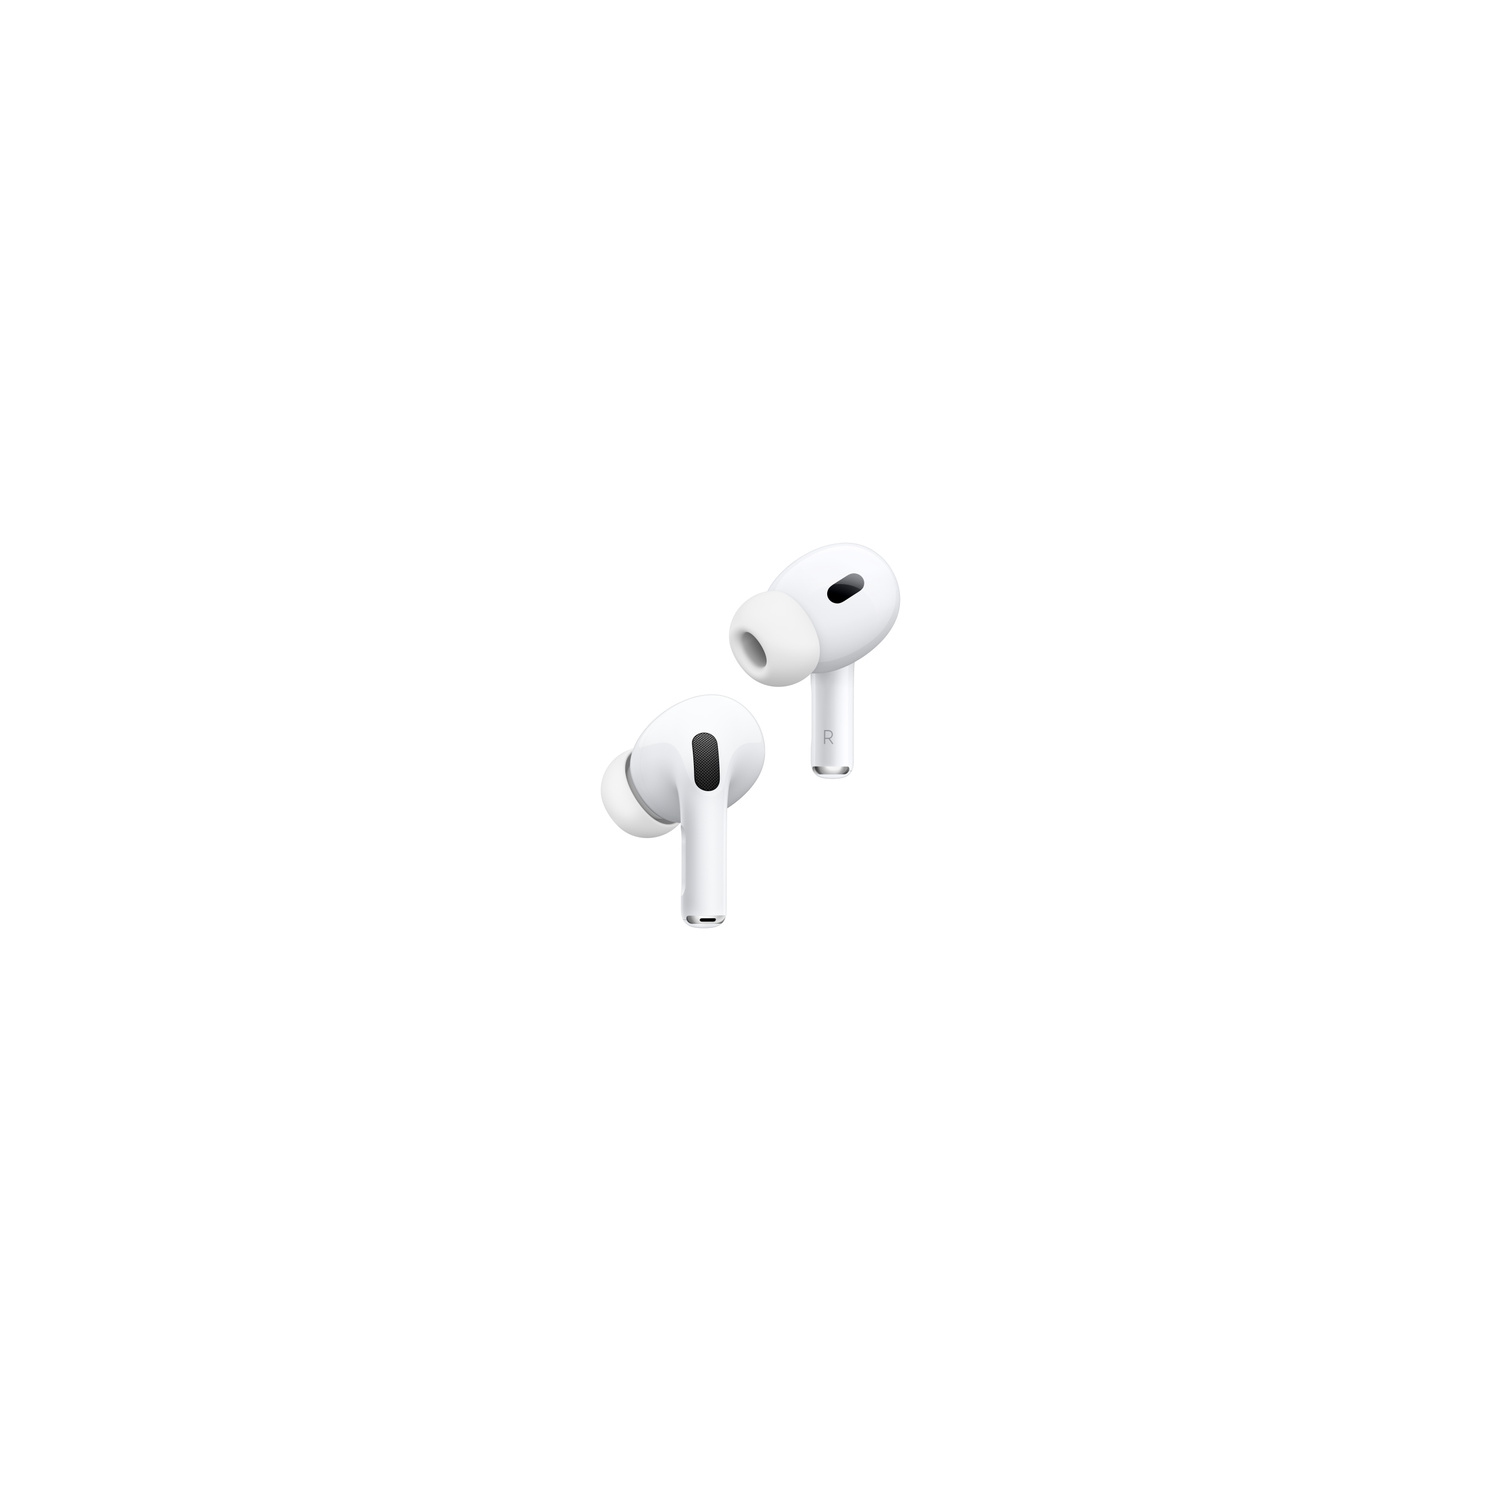 Refurbished (Excellent) - Apple AirPods Pro (2nd generation) In-Ear Noise Cancelling Truly Wireless Headphones - White